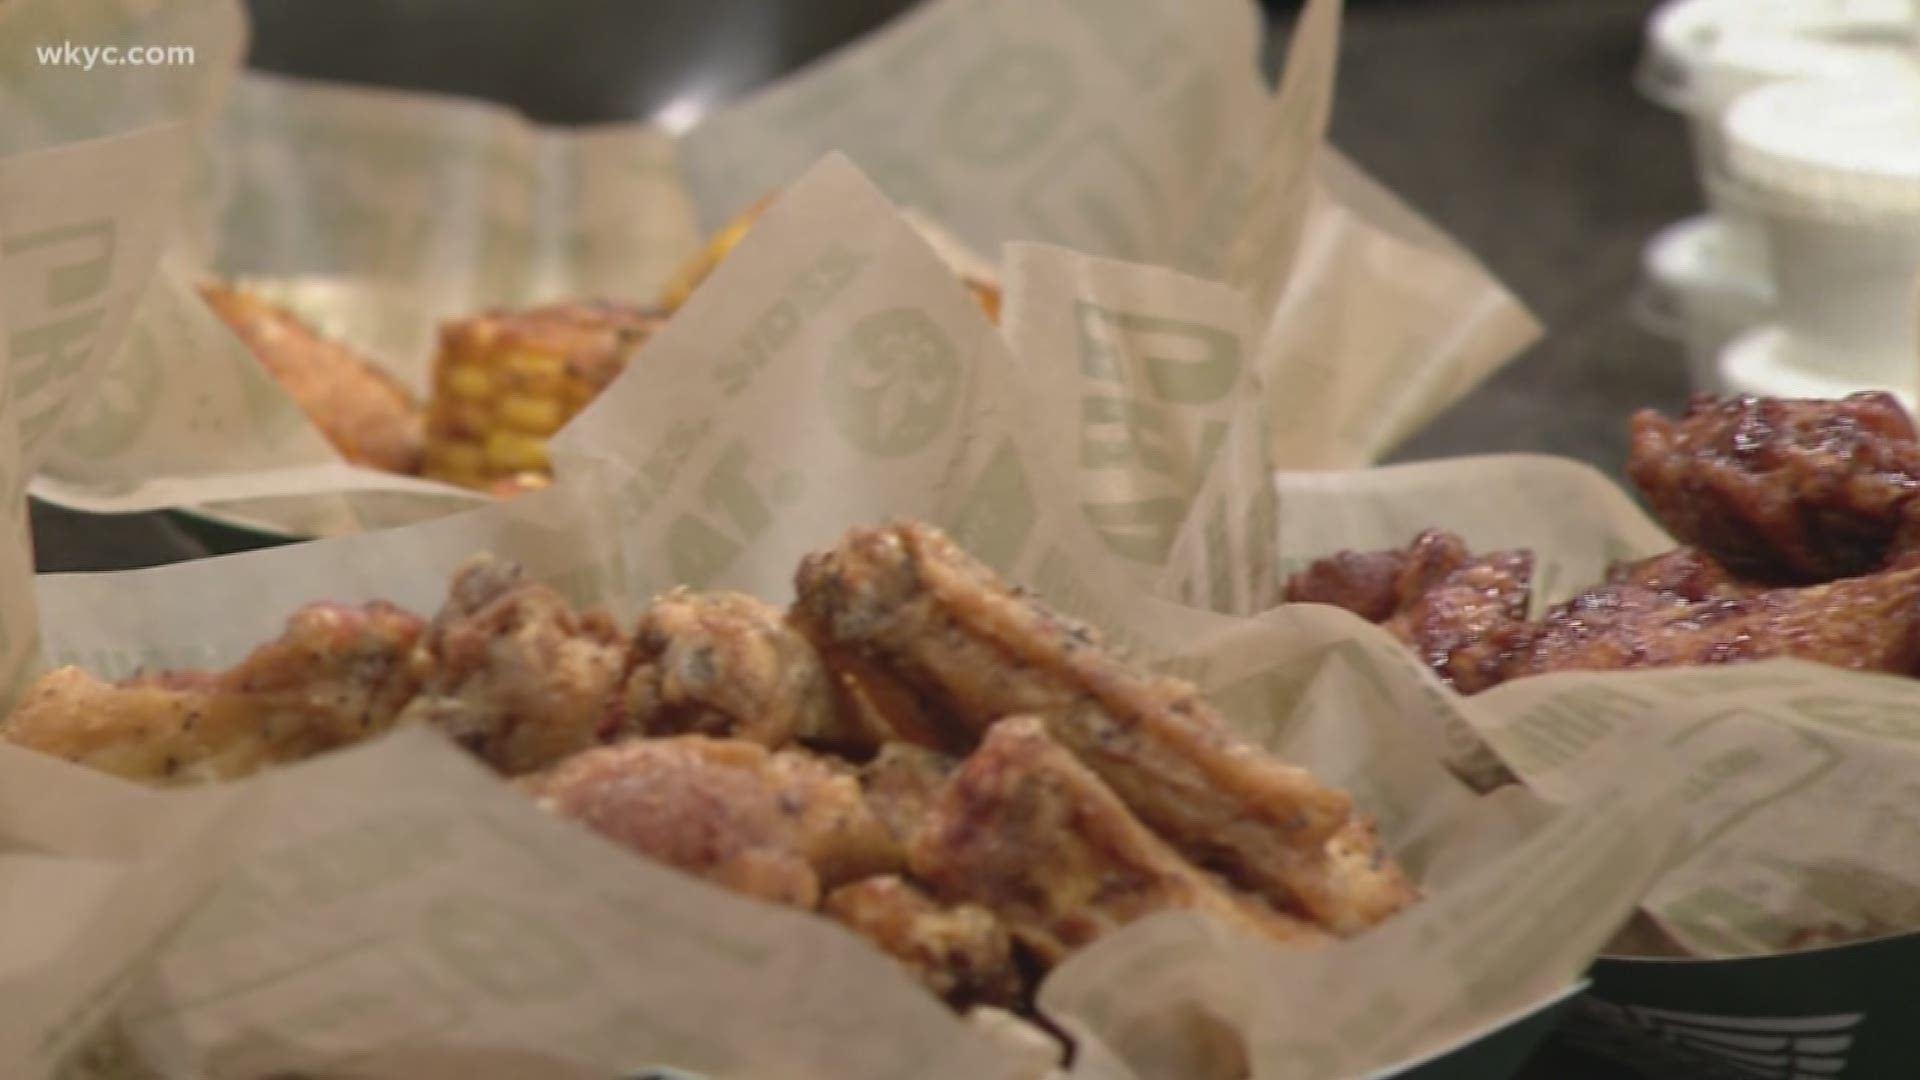 Get ready for your big game party with Wing Stop